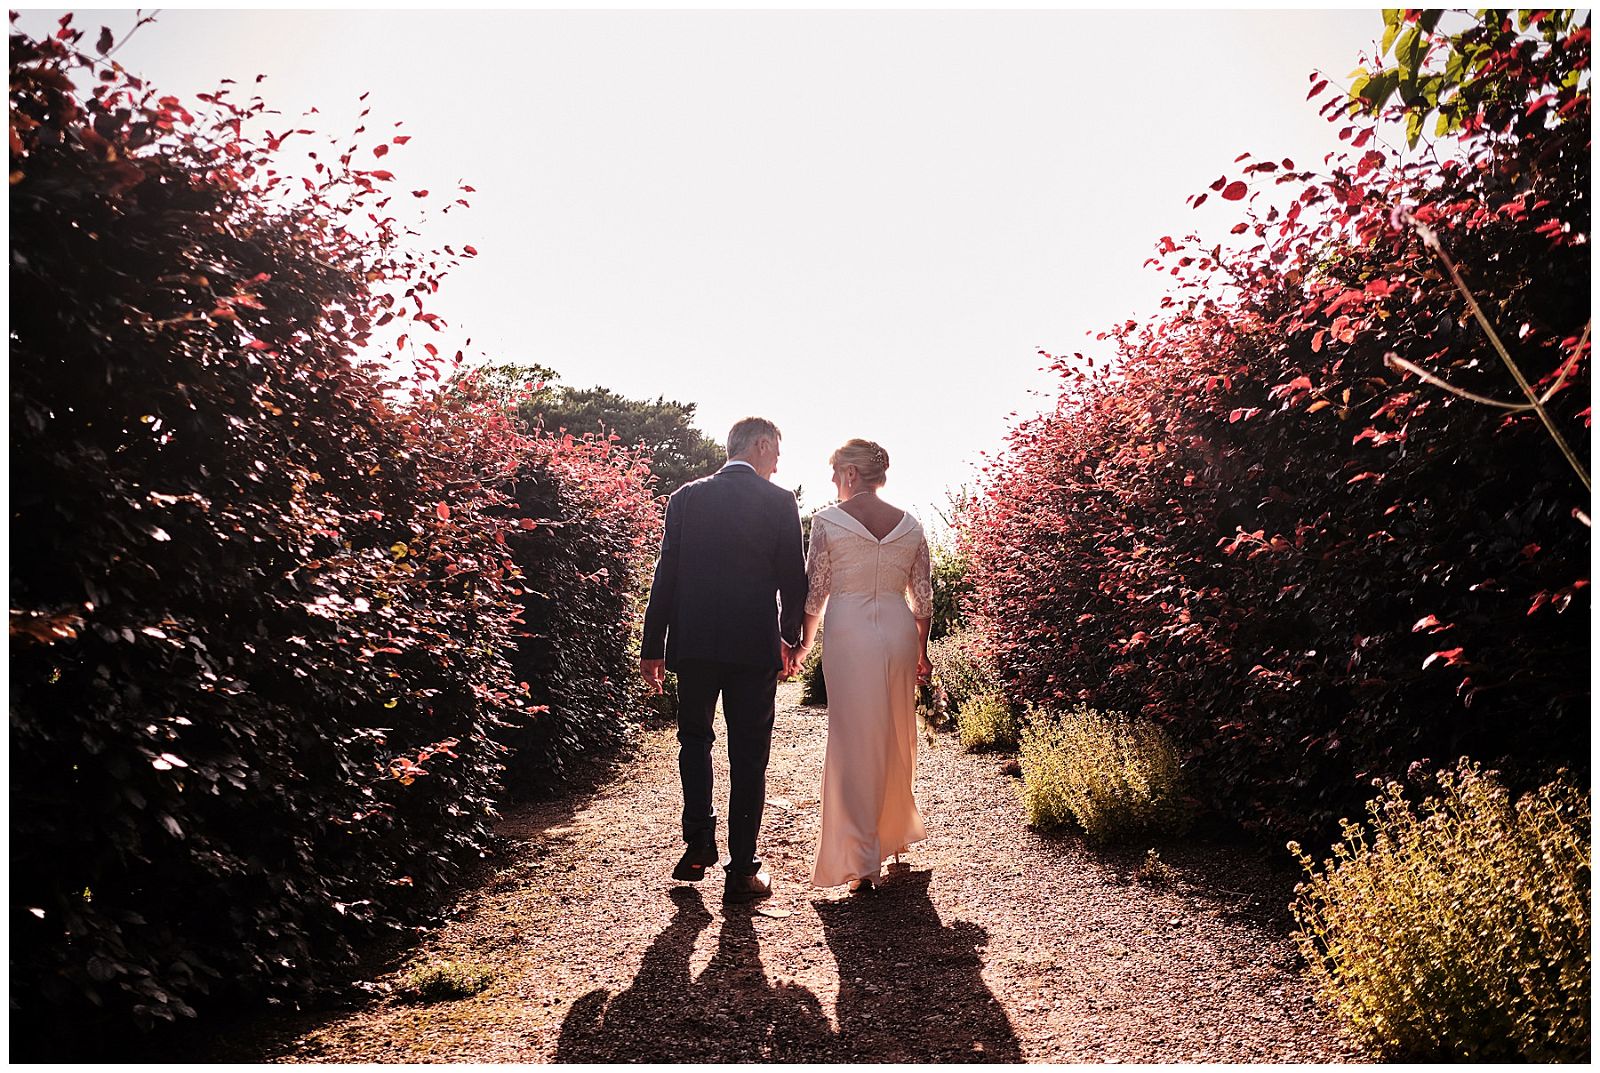 Creative couples portraits around the grounds and gardens at Goldstone Hall in Shropshire by Documentary Wedding Photographer Stuart James